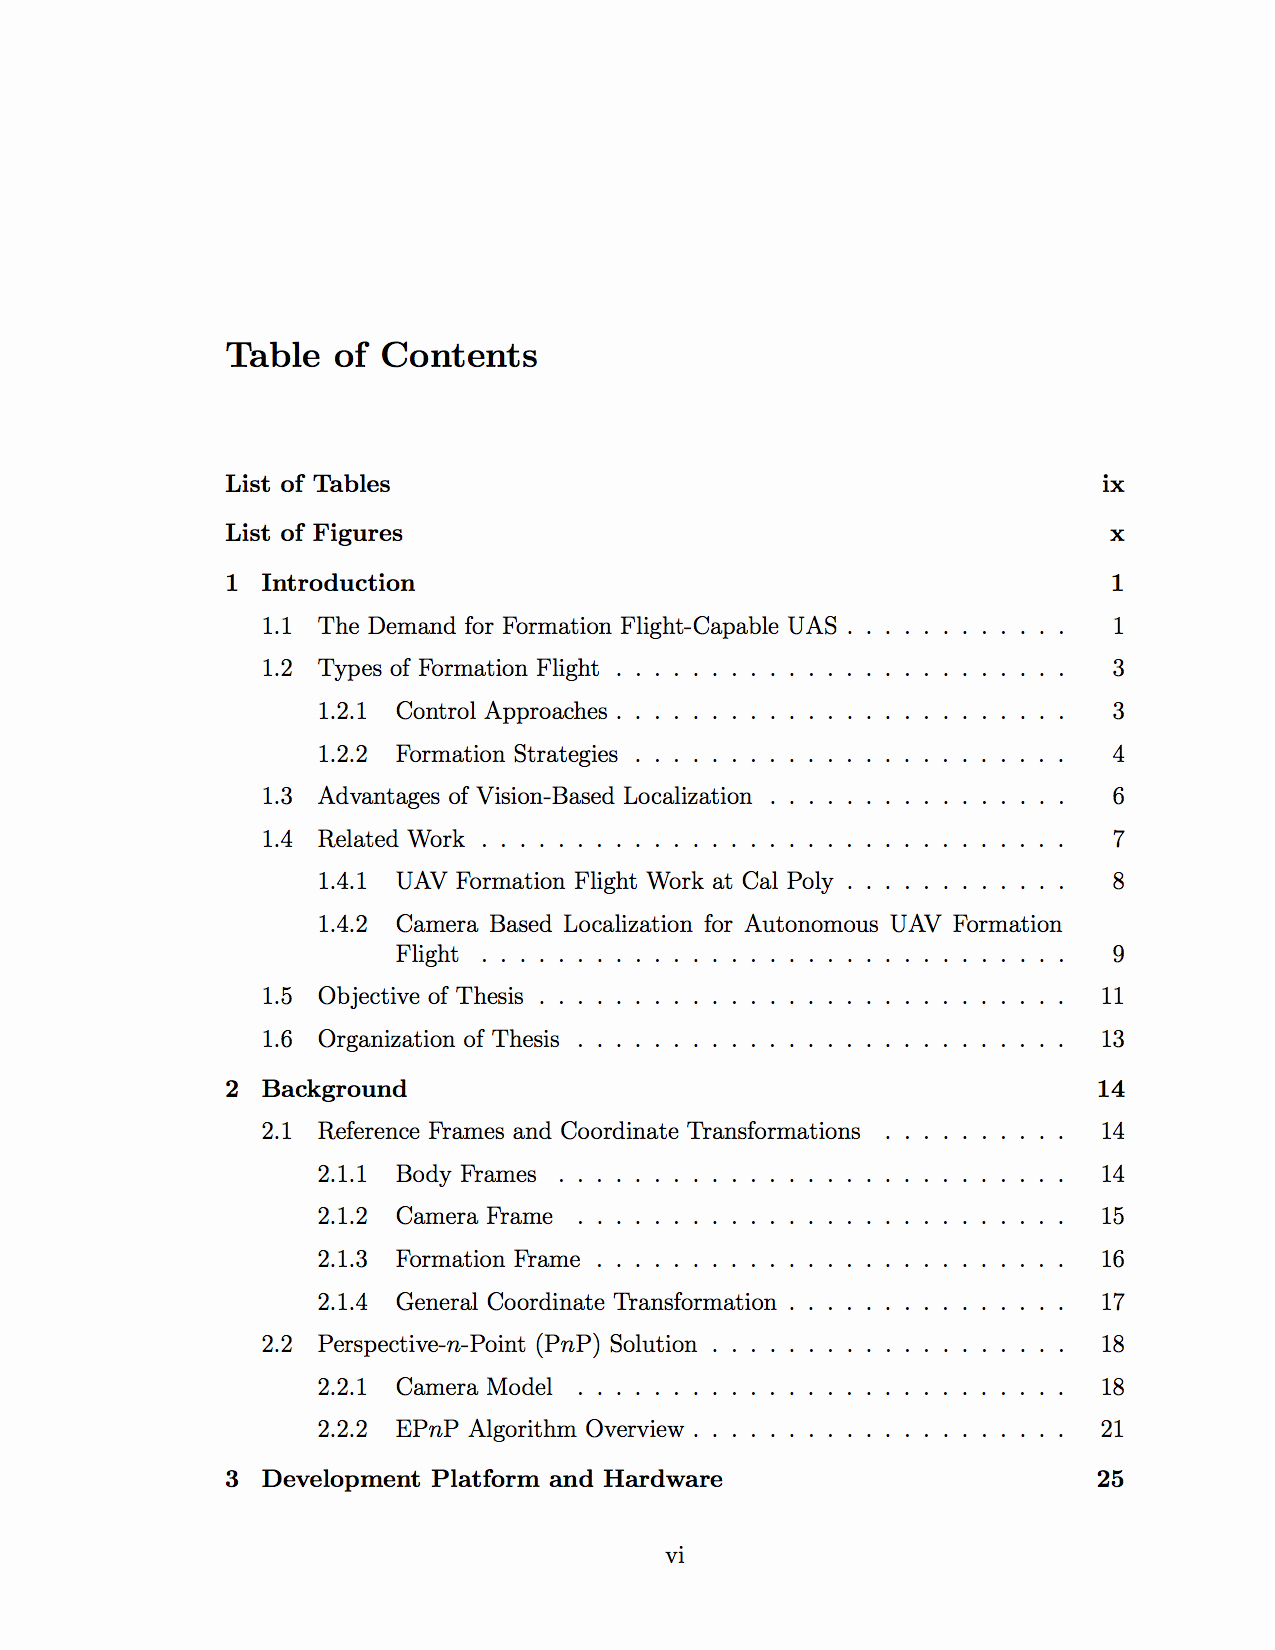 Table Of Contents Sample Page Awesome Chapters Modifying formatting Of Table Of Contents